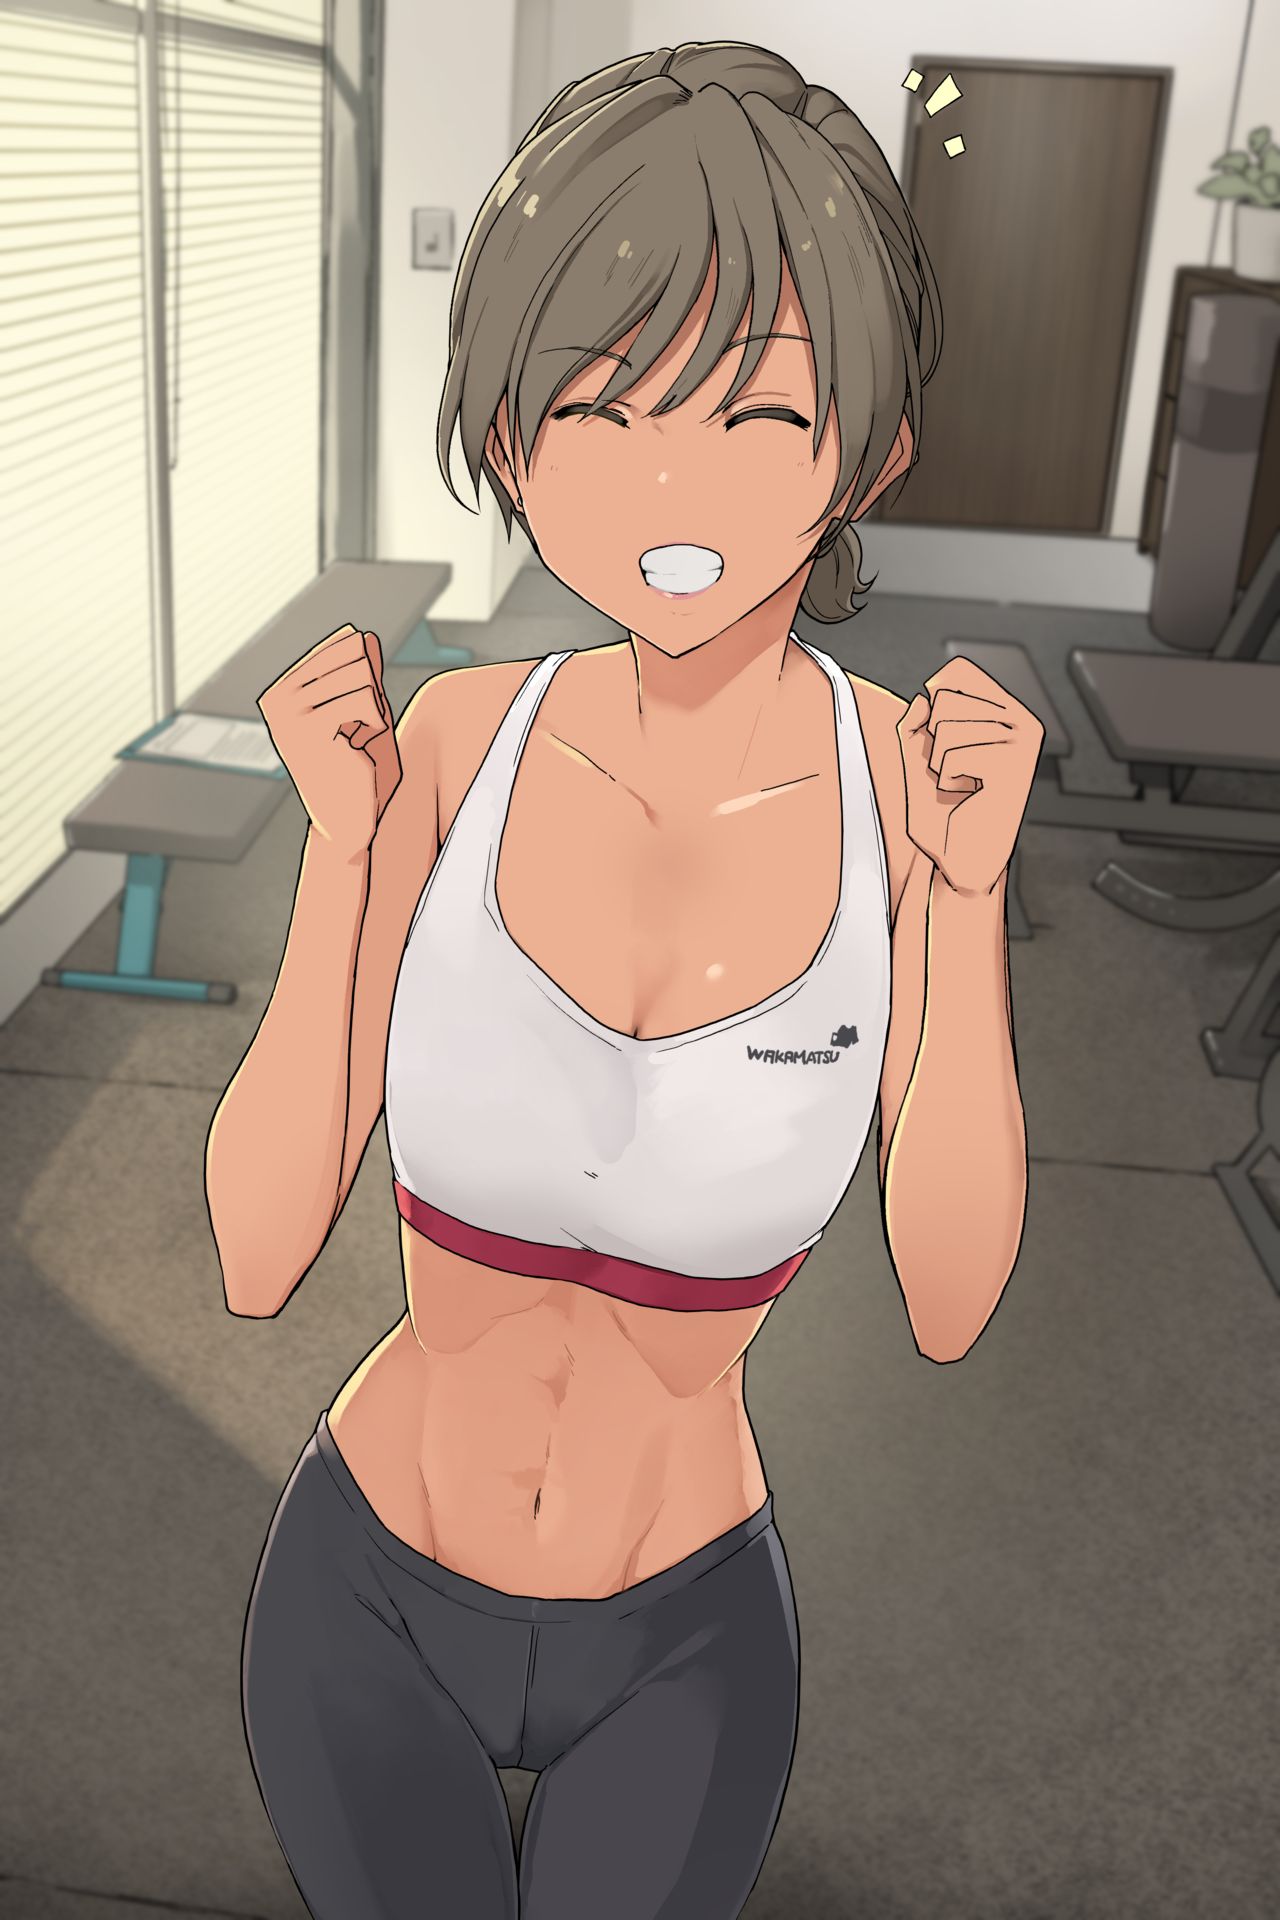 The story of being fucked by my personal trainer - Wakamatsu